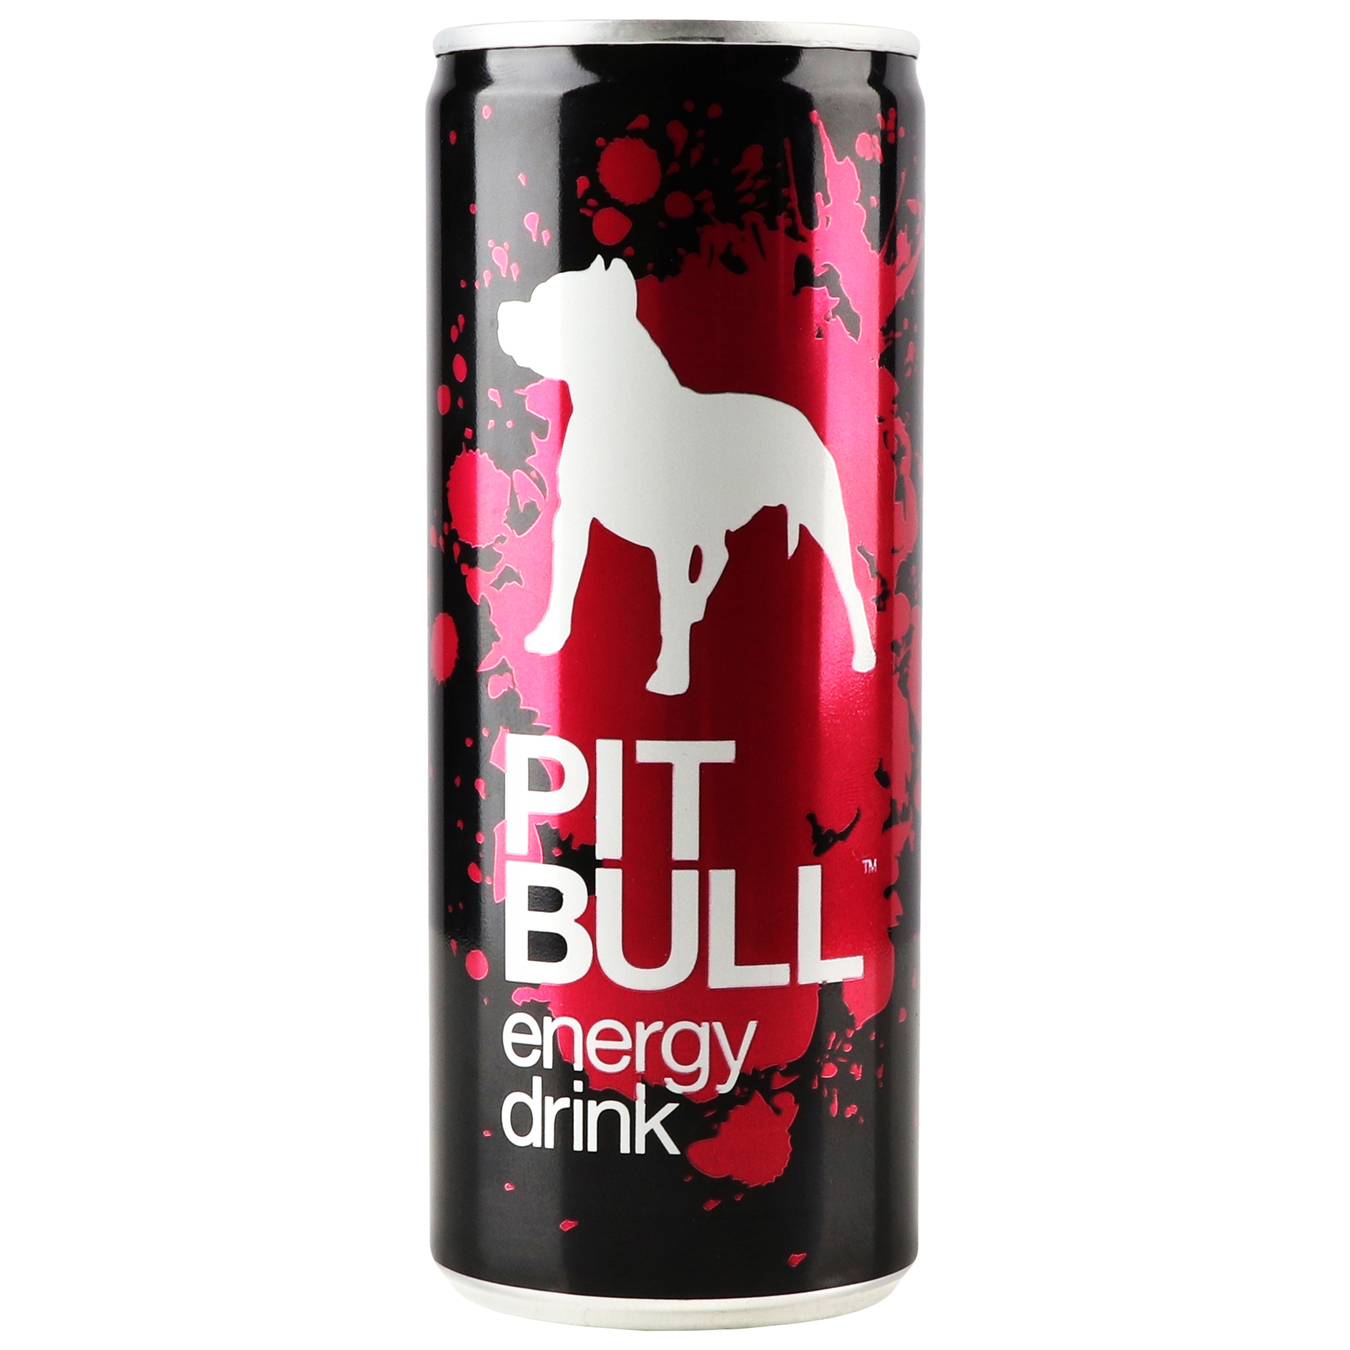 Pit Bull energy drink 0.25 l iron can